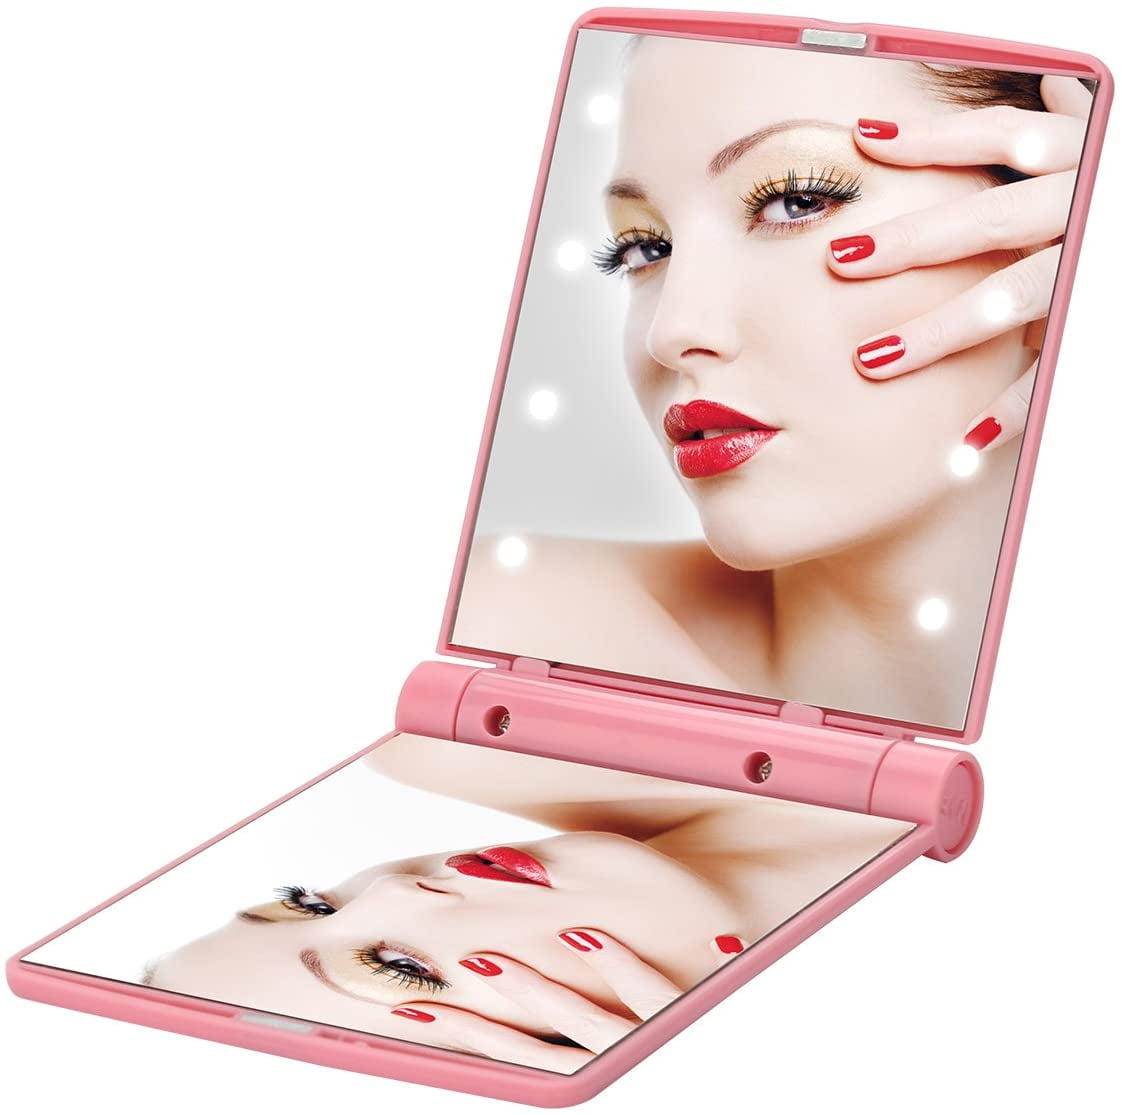 Makeup Mirror with Lights, 8 Led Lighted Make Up Travel Size Mirrors Compact Portable Folding Handheld Lighting Kits for Teen Girls College Essentials Women Kids(Pink) - Walmart.com